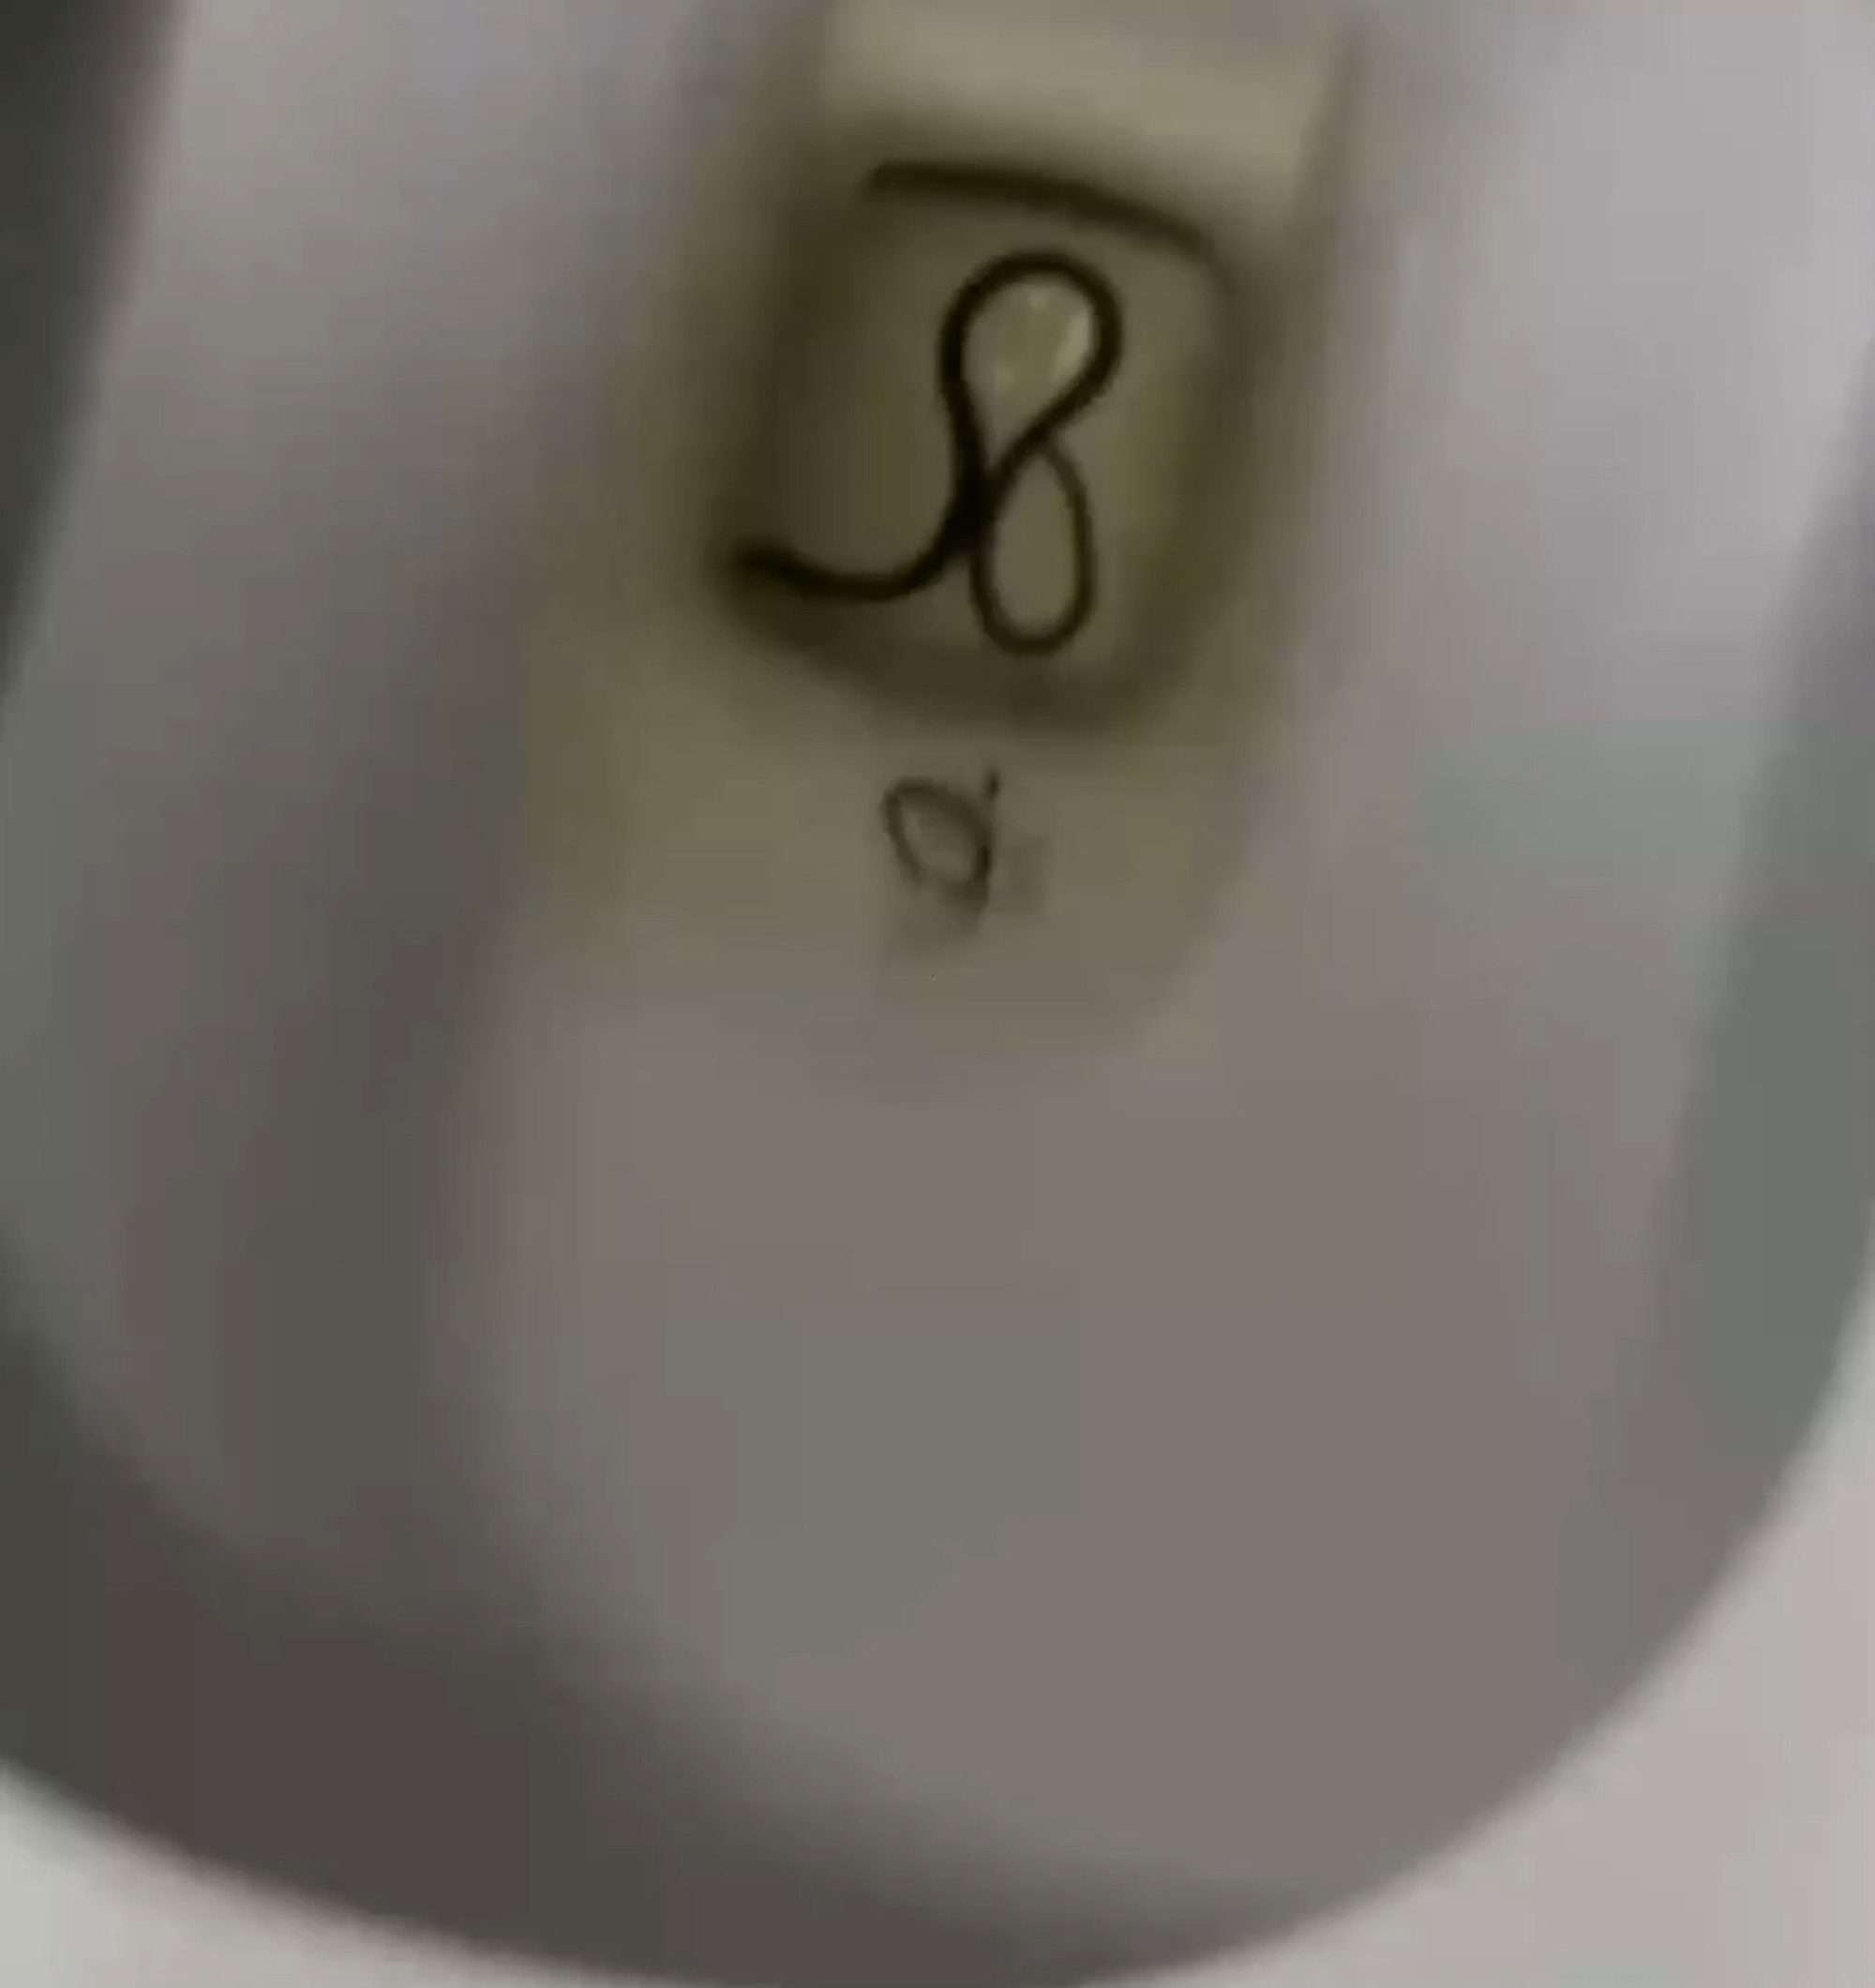 Read more about the article Woman Shocked When She Spots Snake Moving Inside Toilet Seconds Before Using It